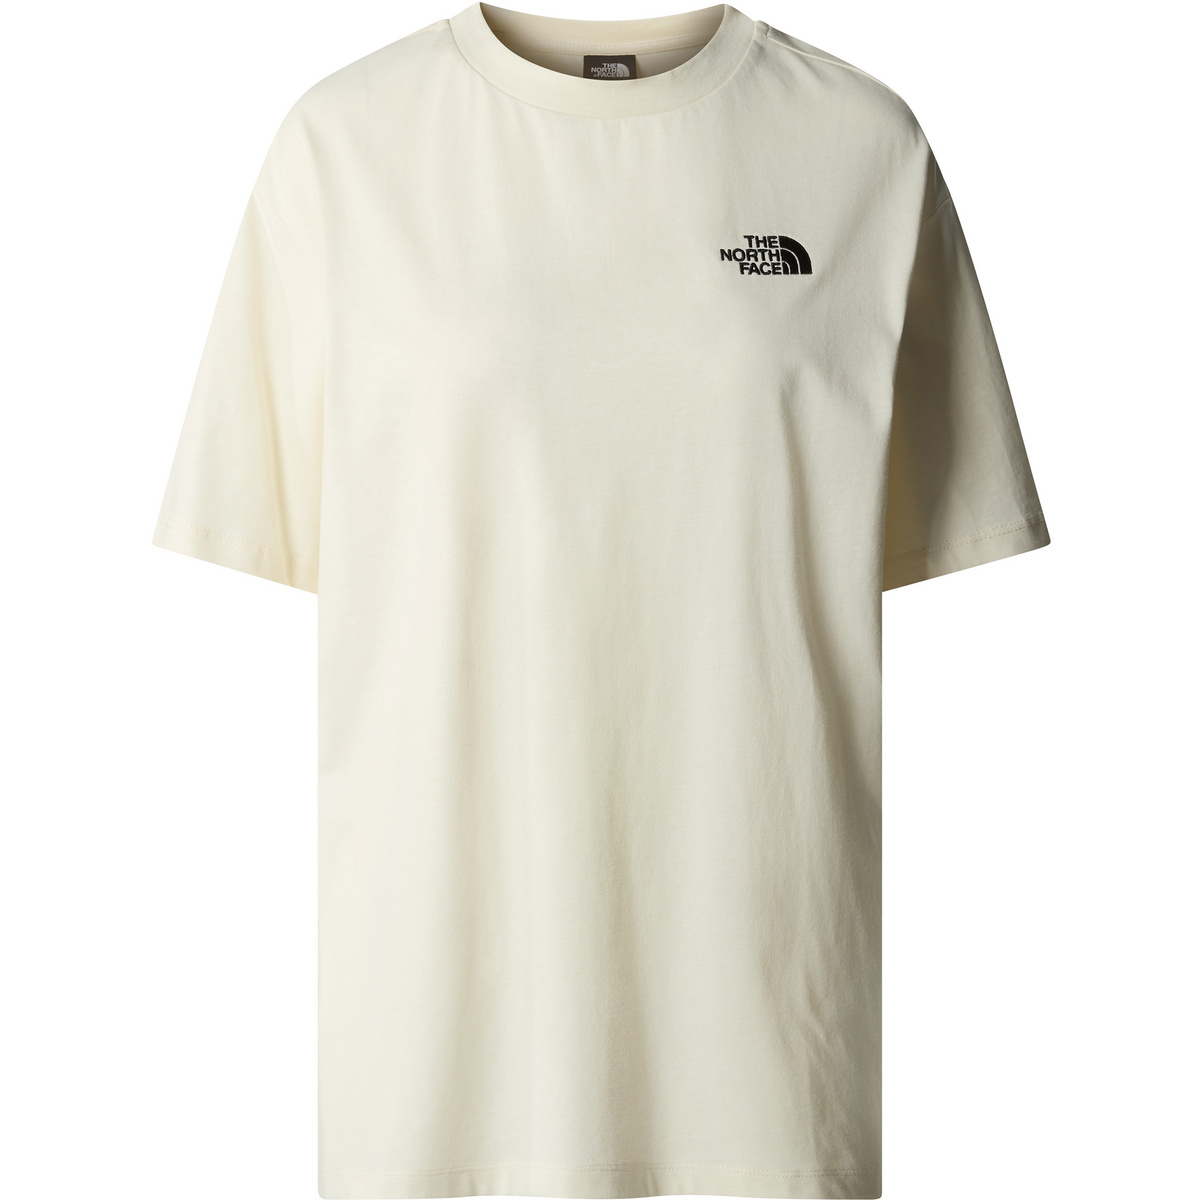 The North Face Damen Essential Oversize T-Shirt von The North Face